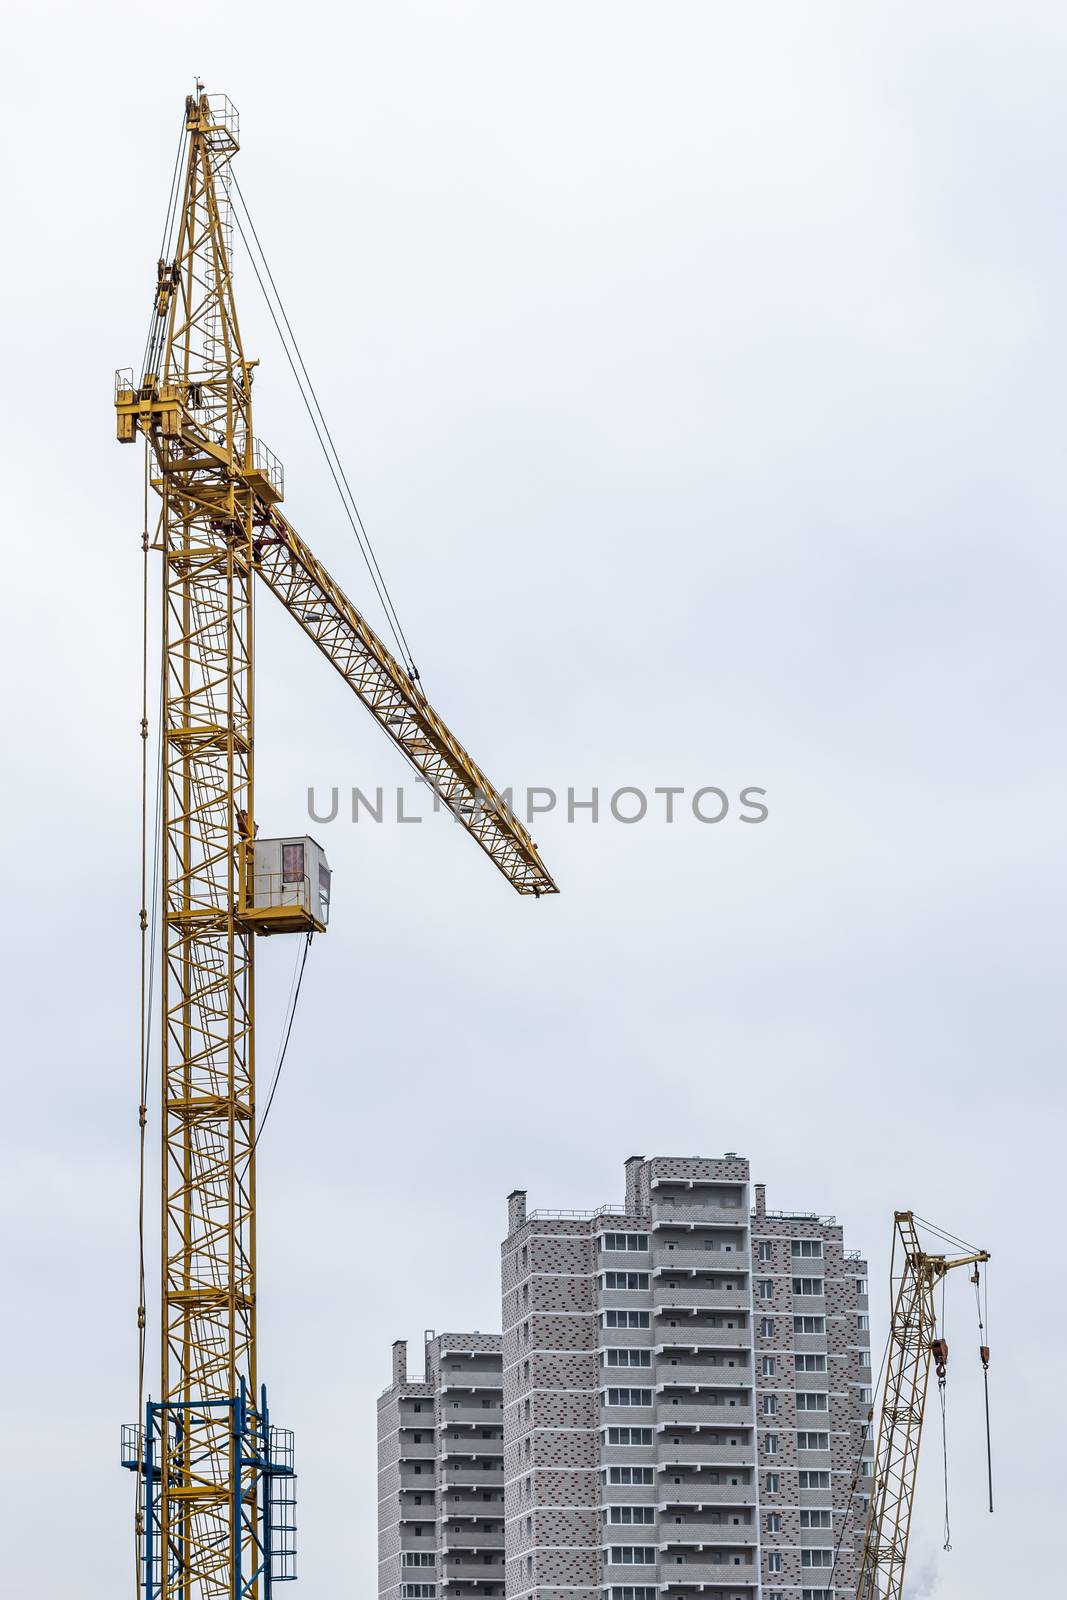 Boom crane on a background of cloudy cloudy sky and building.